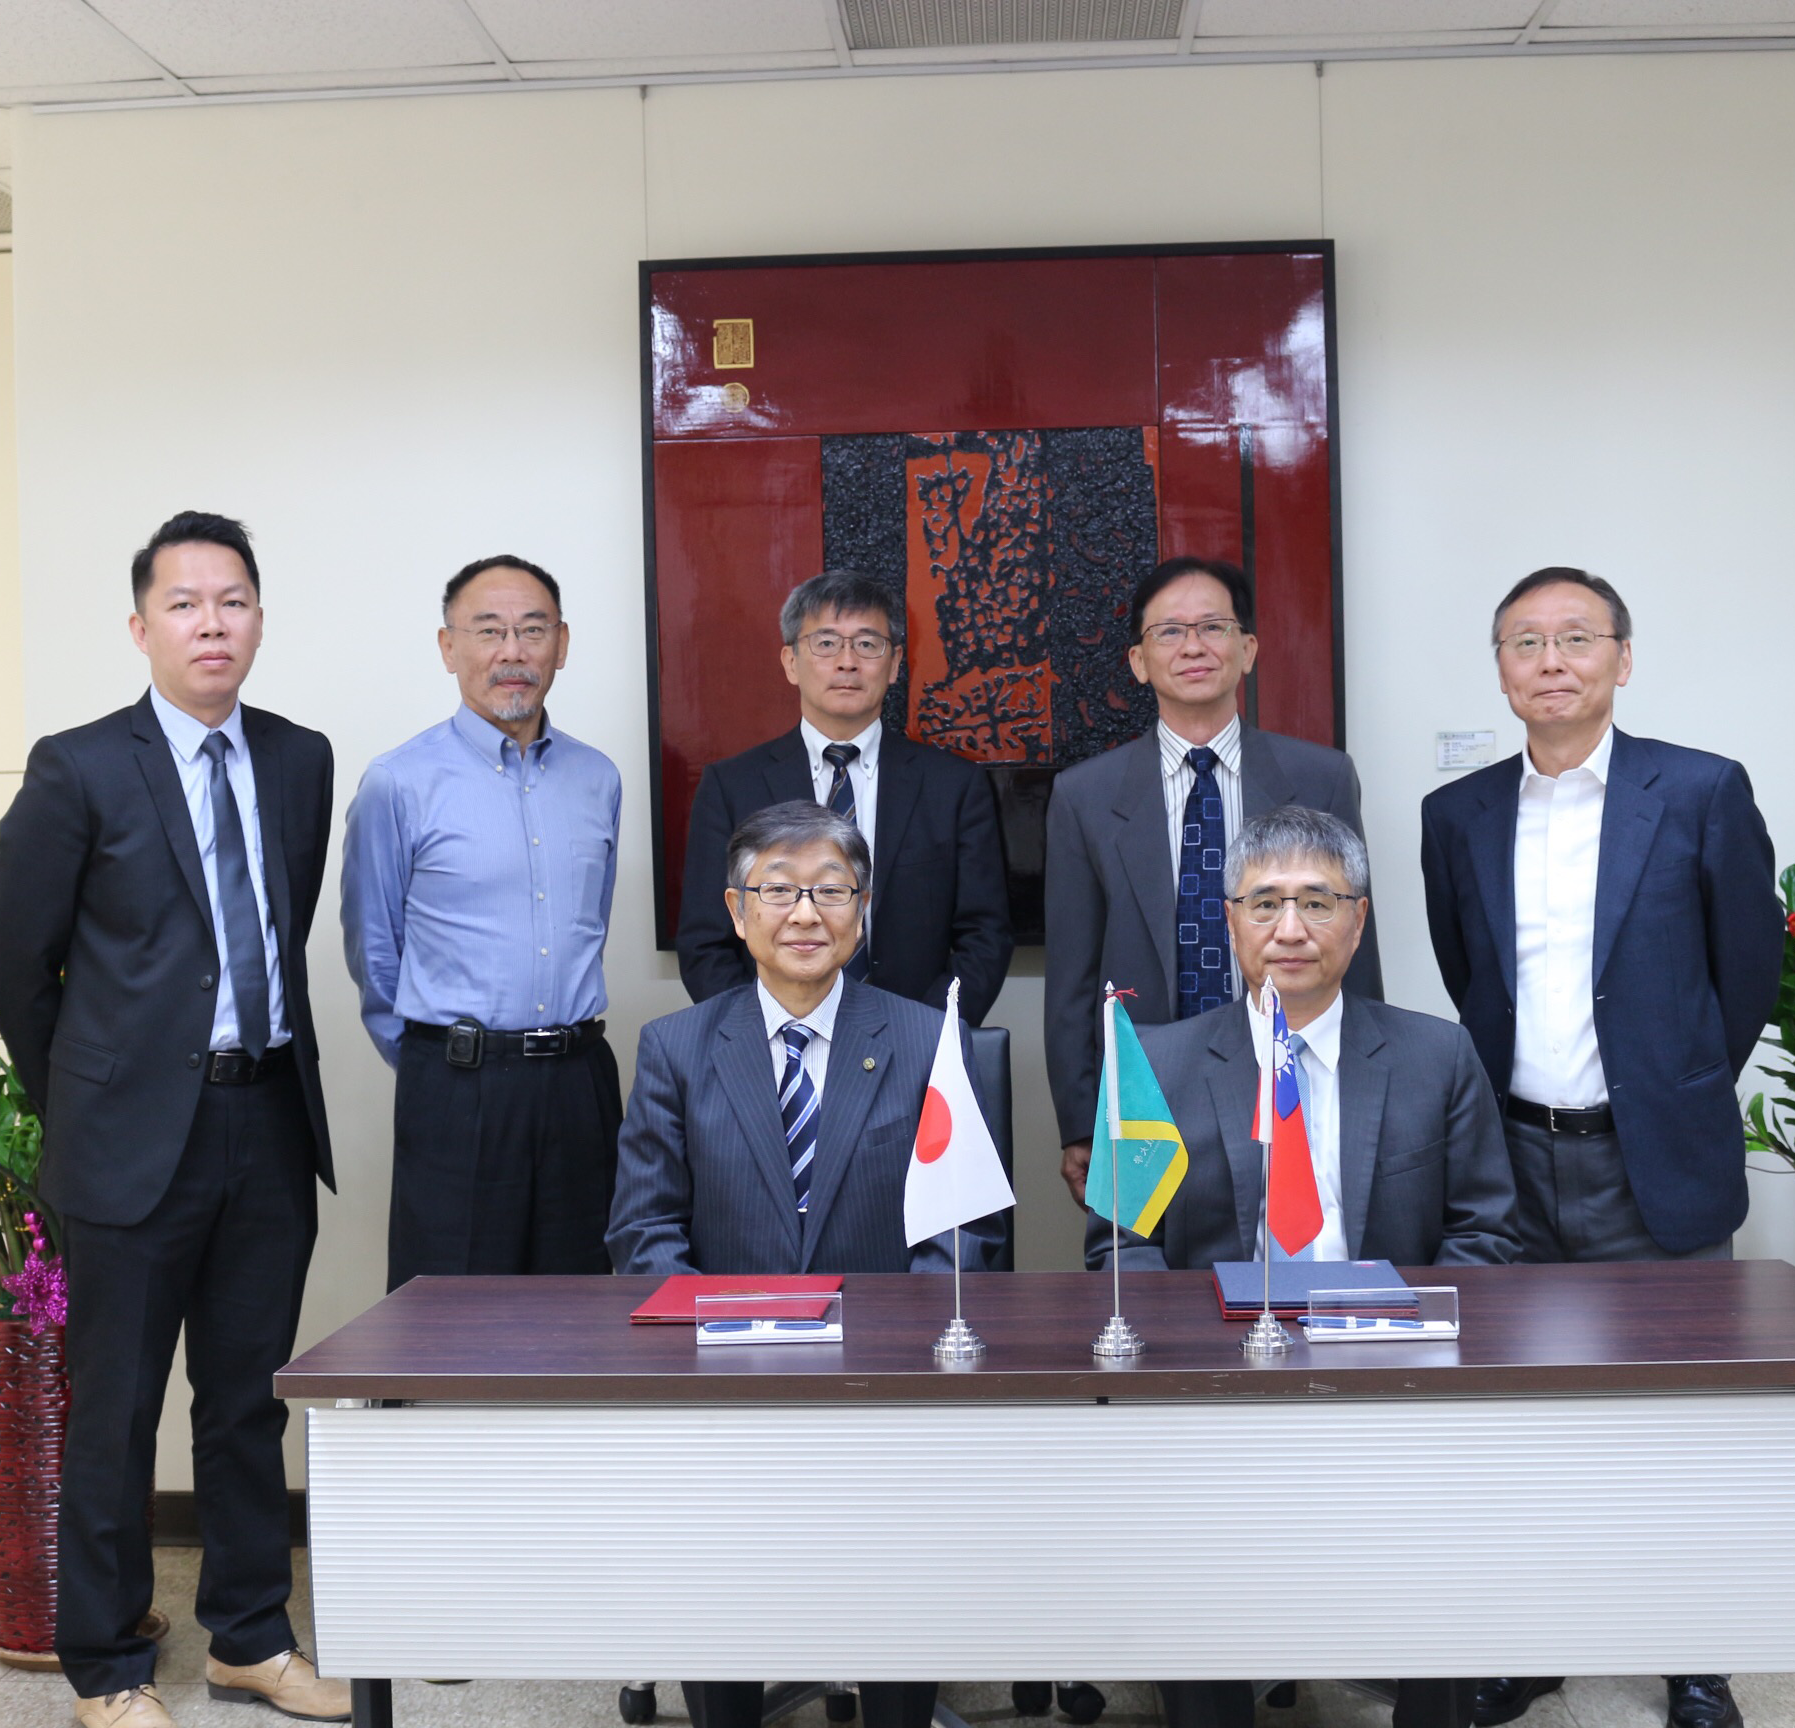 RDMM Promotion Center of KRI signed up MOU with National Yunlin University of Science and Technology in Taiwan 